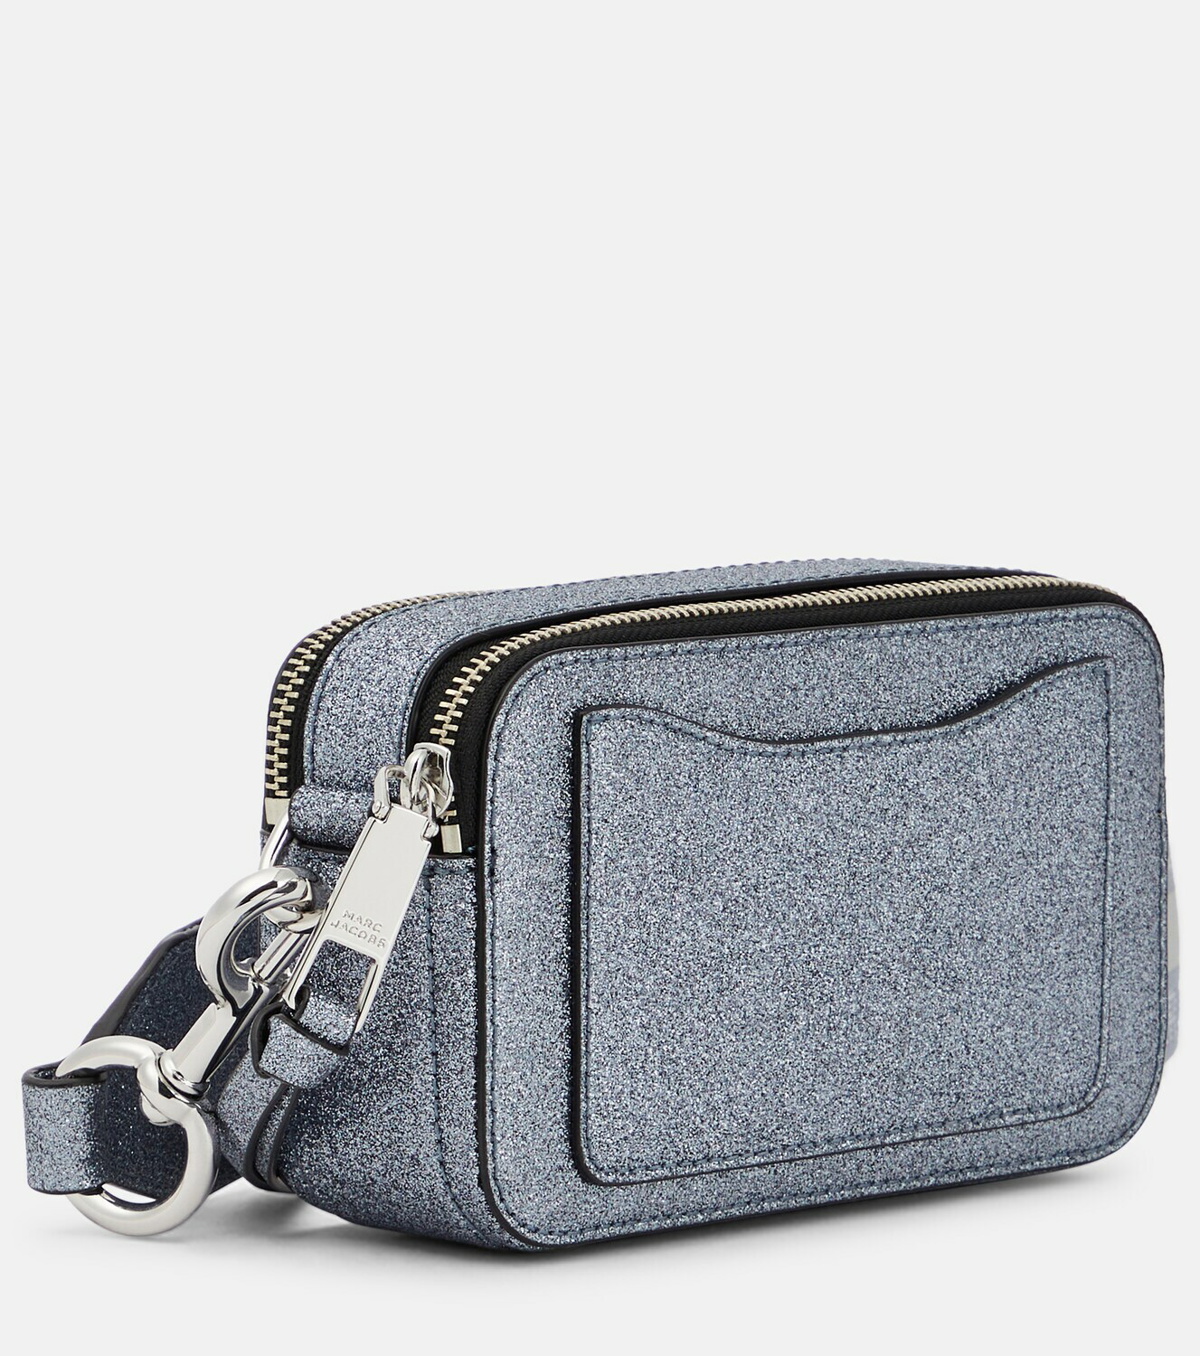 Designer Marc Jacobs Snapshot Camera Crossbody Camera Bag Purse 2 Styles  Available For Women From China_bestbabys, $6.08 | DHgate.Com